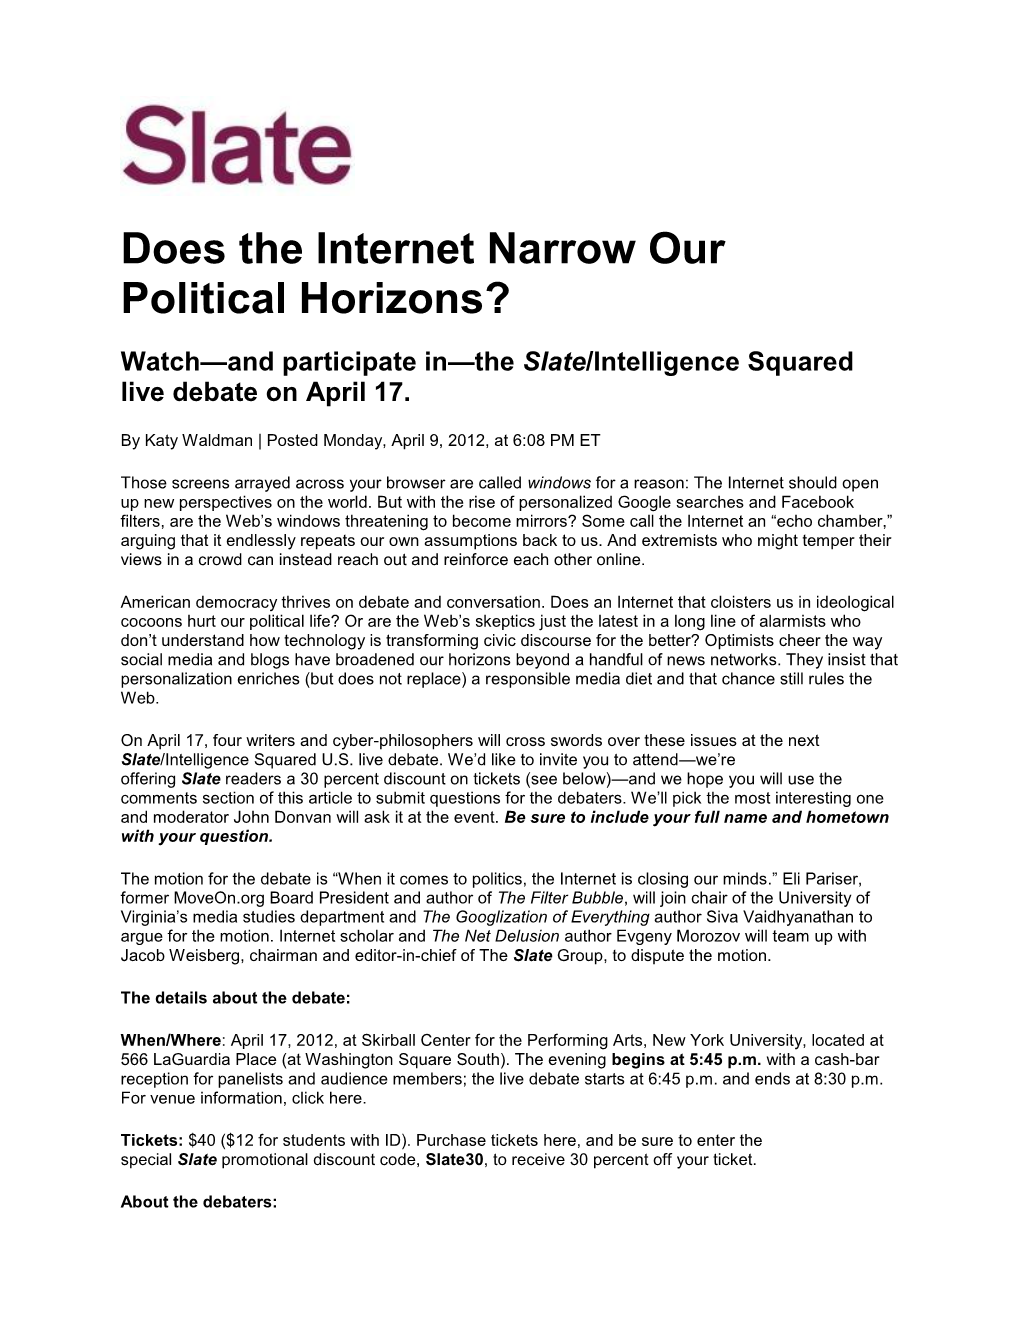 Does the Internet Narrow Our Political Horizons?